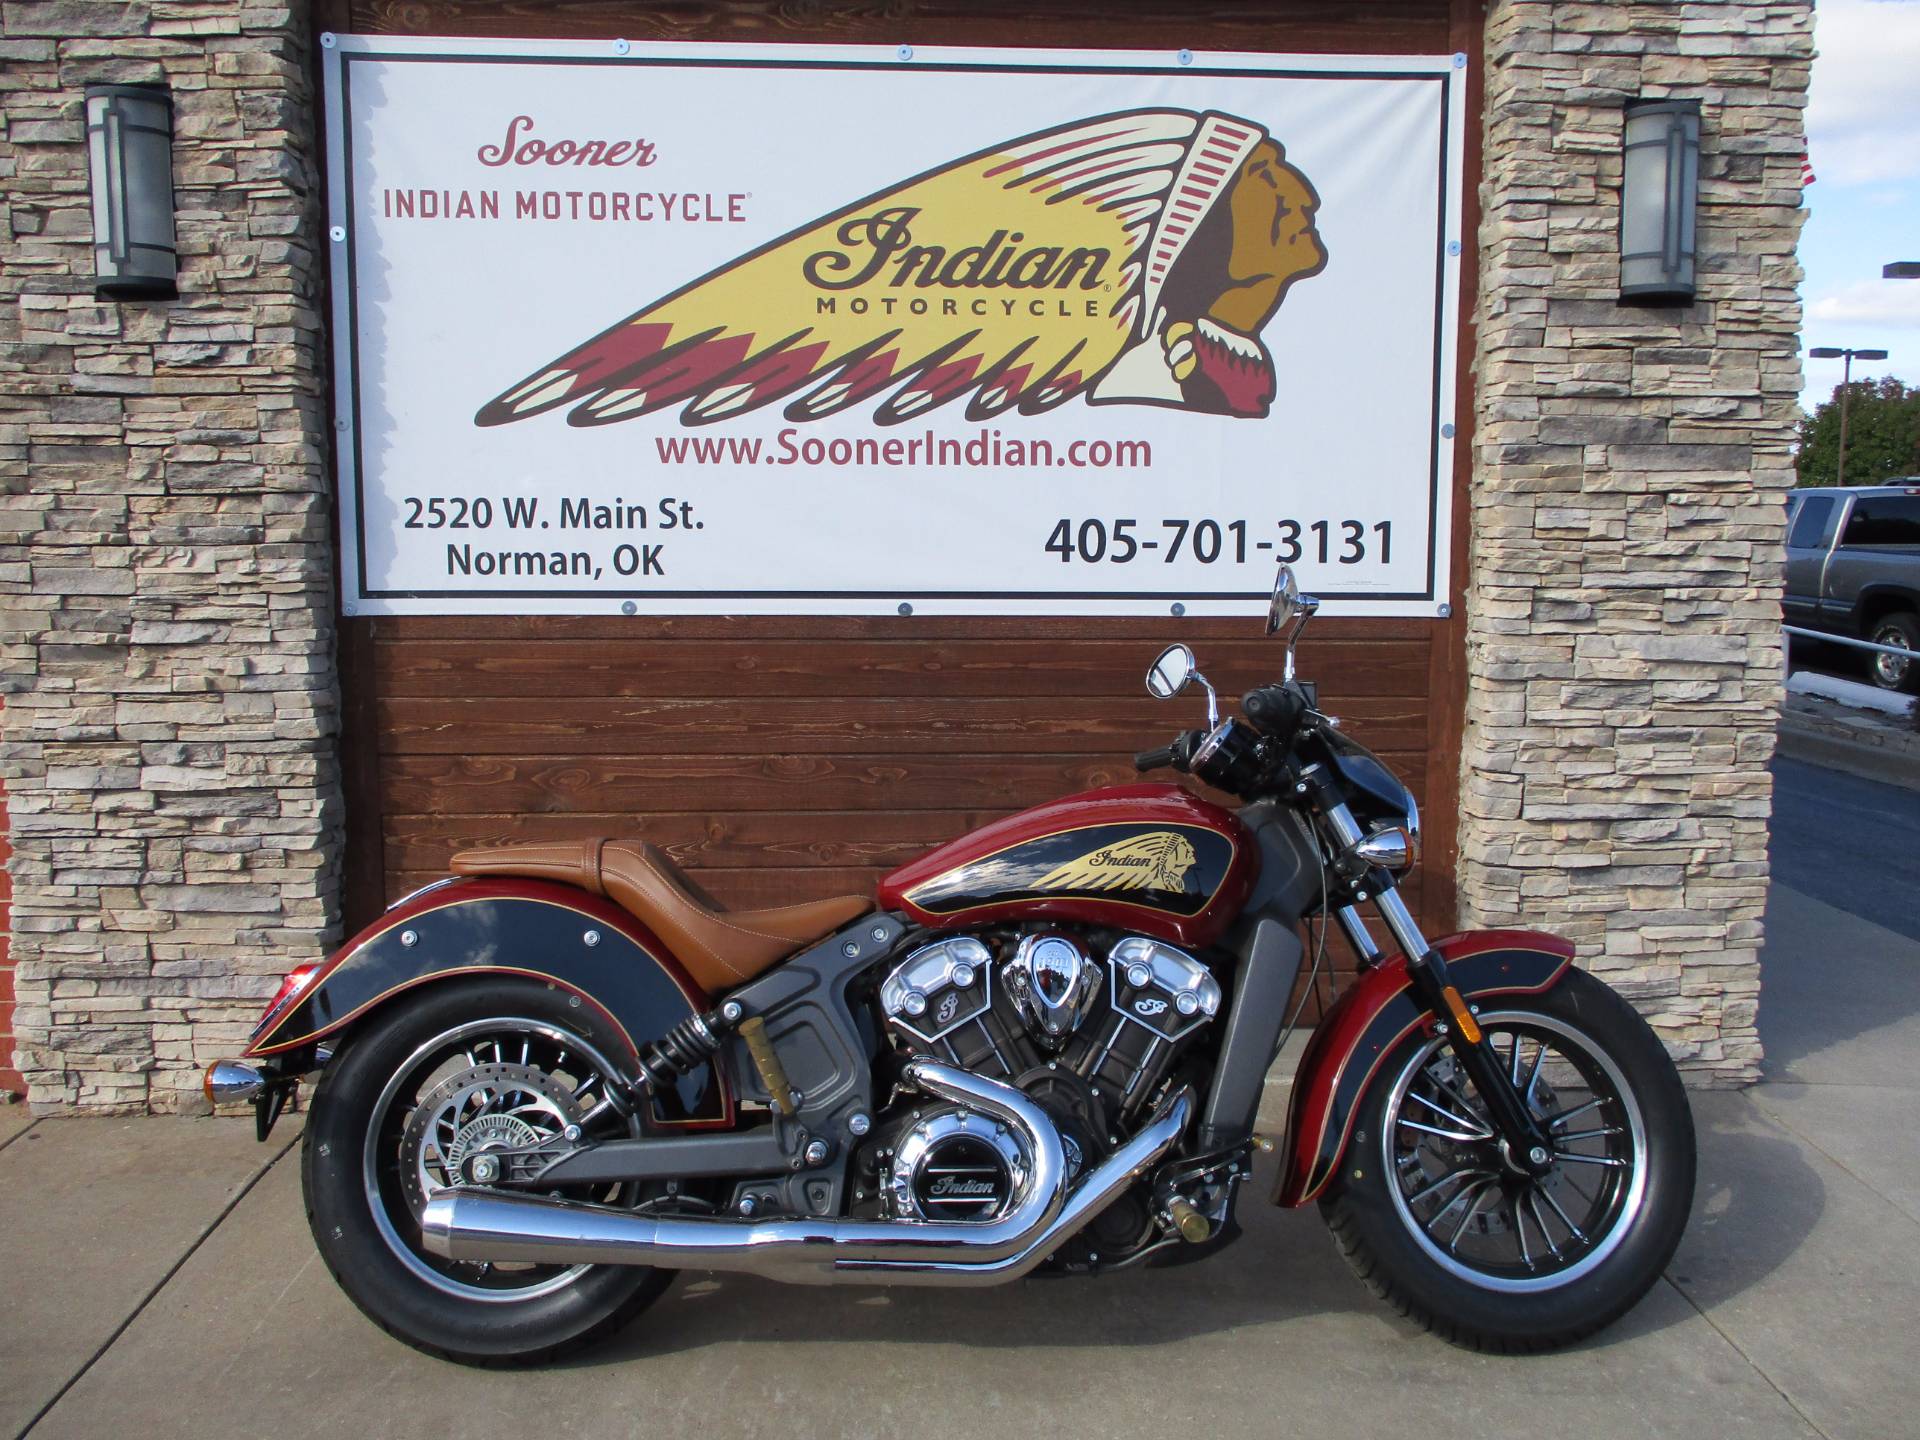 Sooner Indian Motorcycles Is Located In Norman OK Shop Our Large